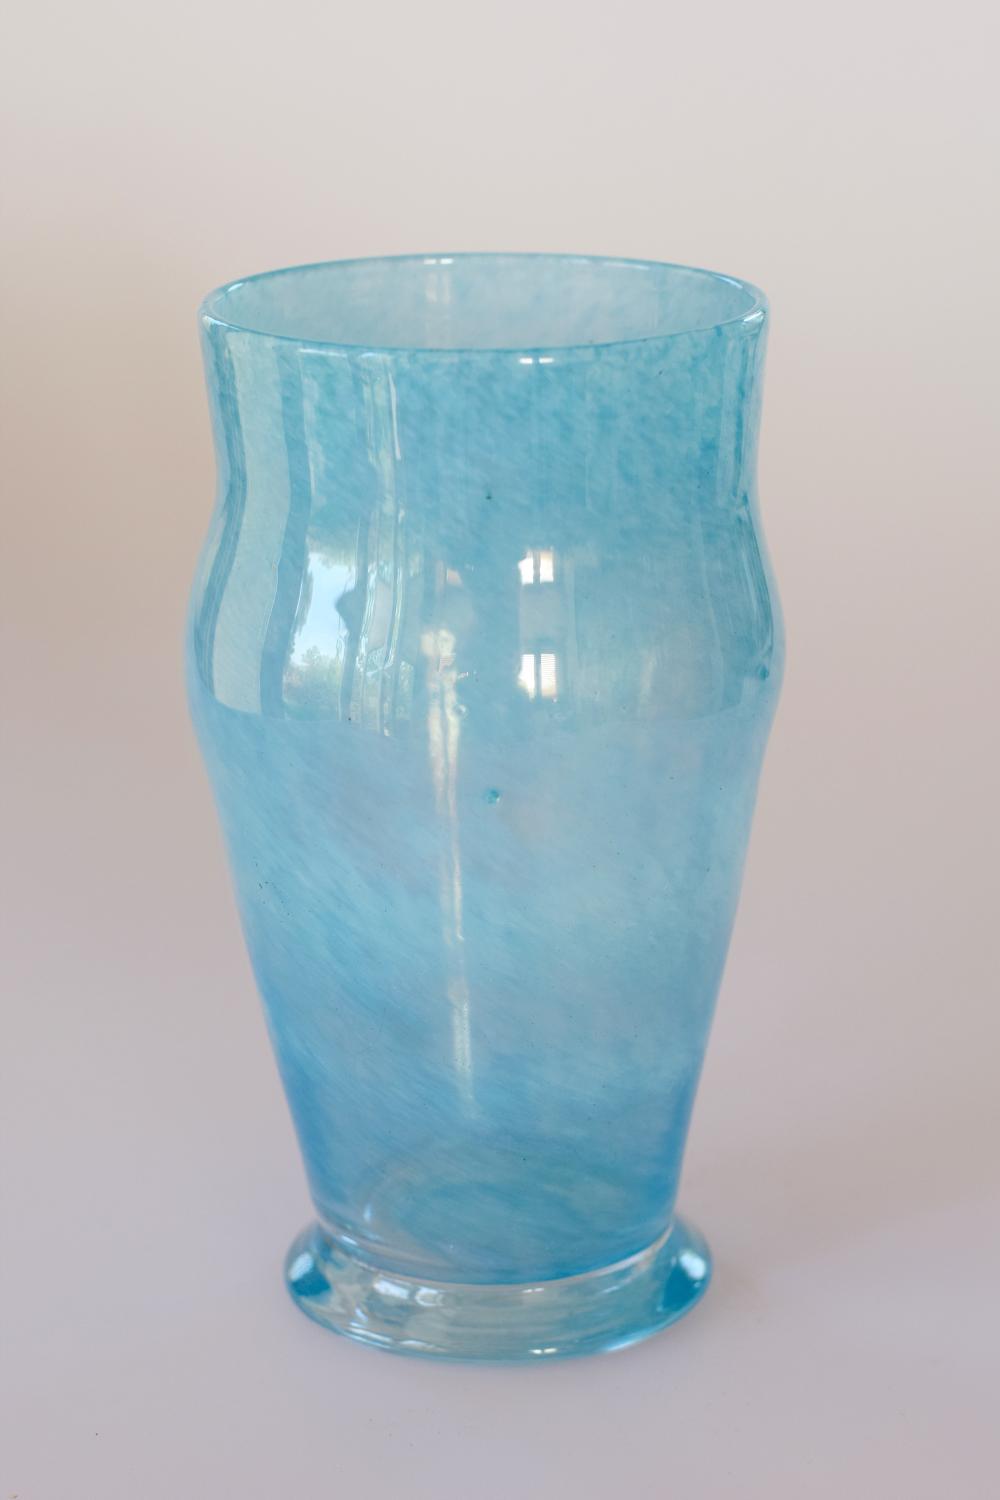 Small pale blue cloudy vase.